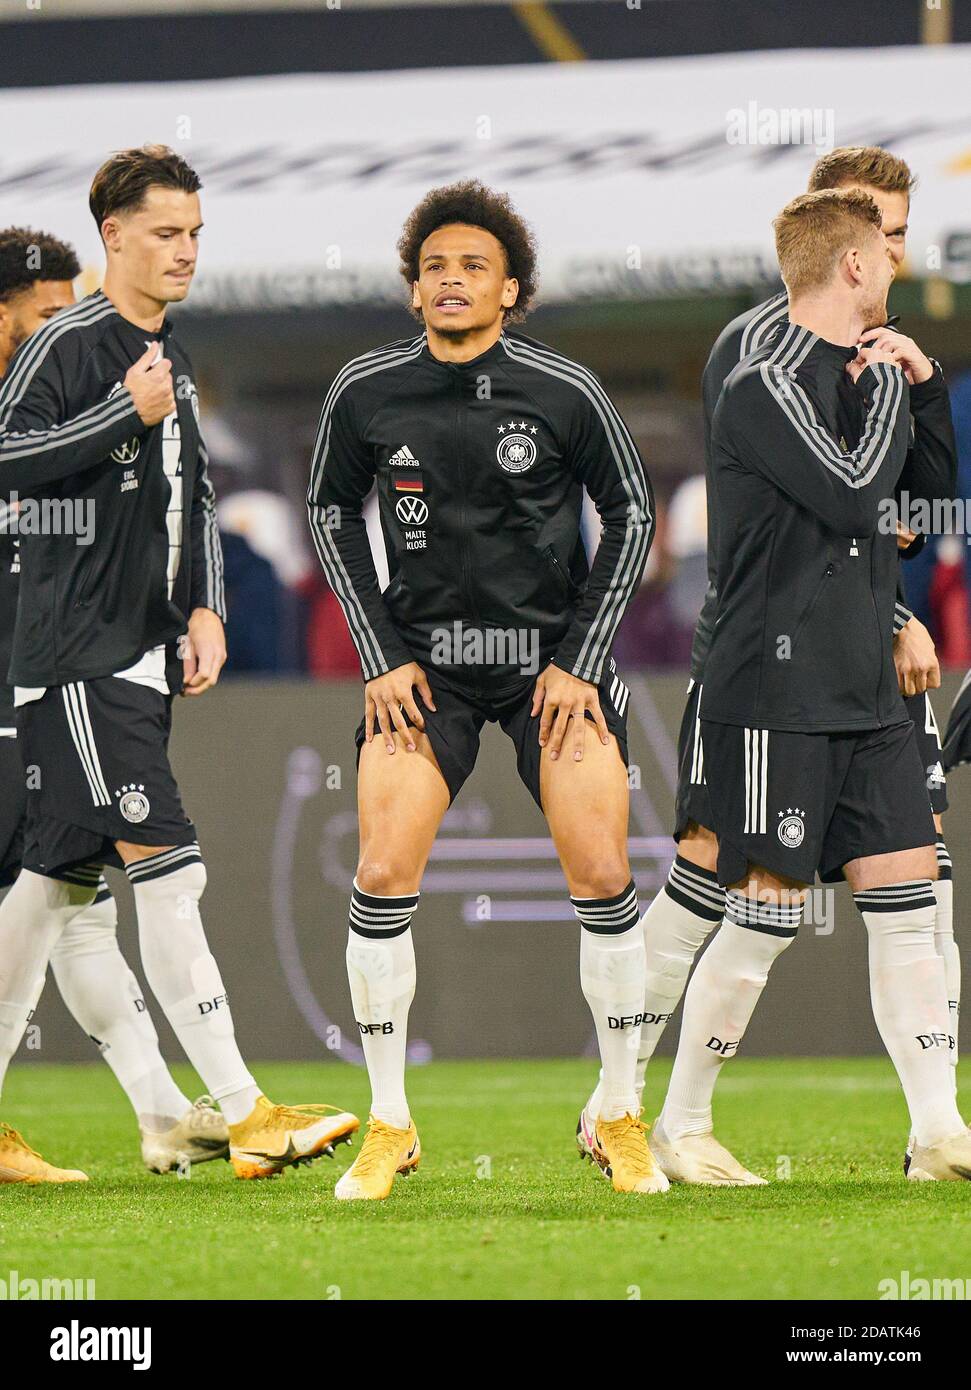 Leroy SANE, DFB 19  in the match GERMANY - UKRAINE 3-1 UEFA Nations League,  German Football Nationalteam, DFB , Season 2020/2021 in Leipzig, Germany, November 14, 2020 © Peter Schatz / Alamy Live News   Important: DFB regulations prohibit any use of photographs as image sequences and/or quasi-video. Stock Photo